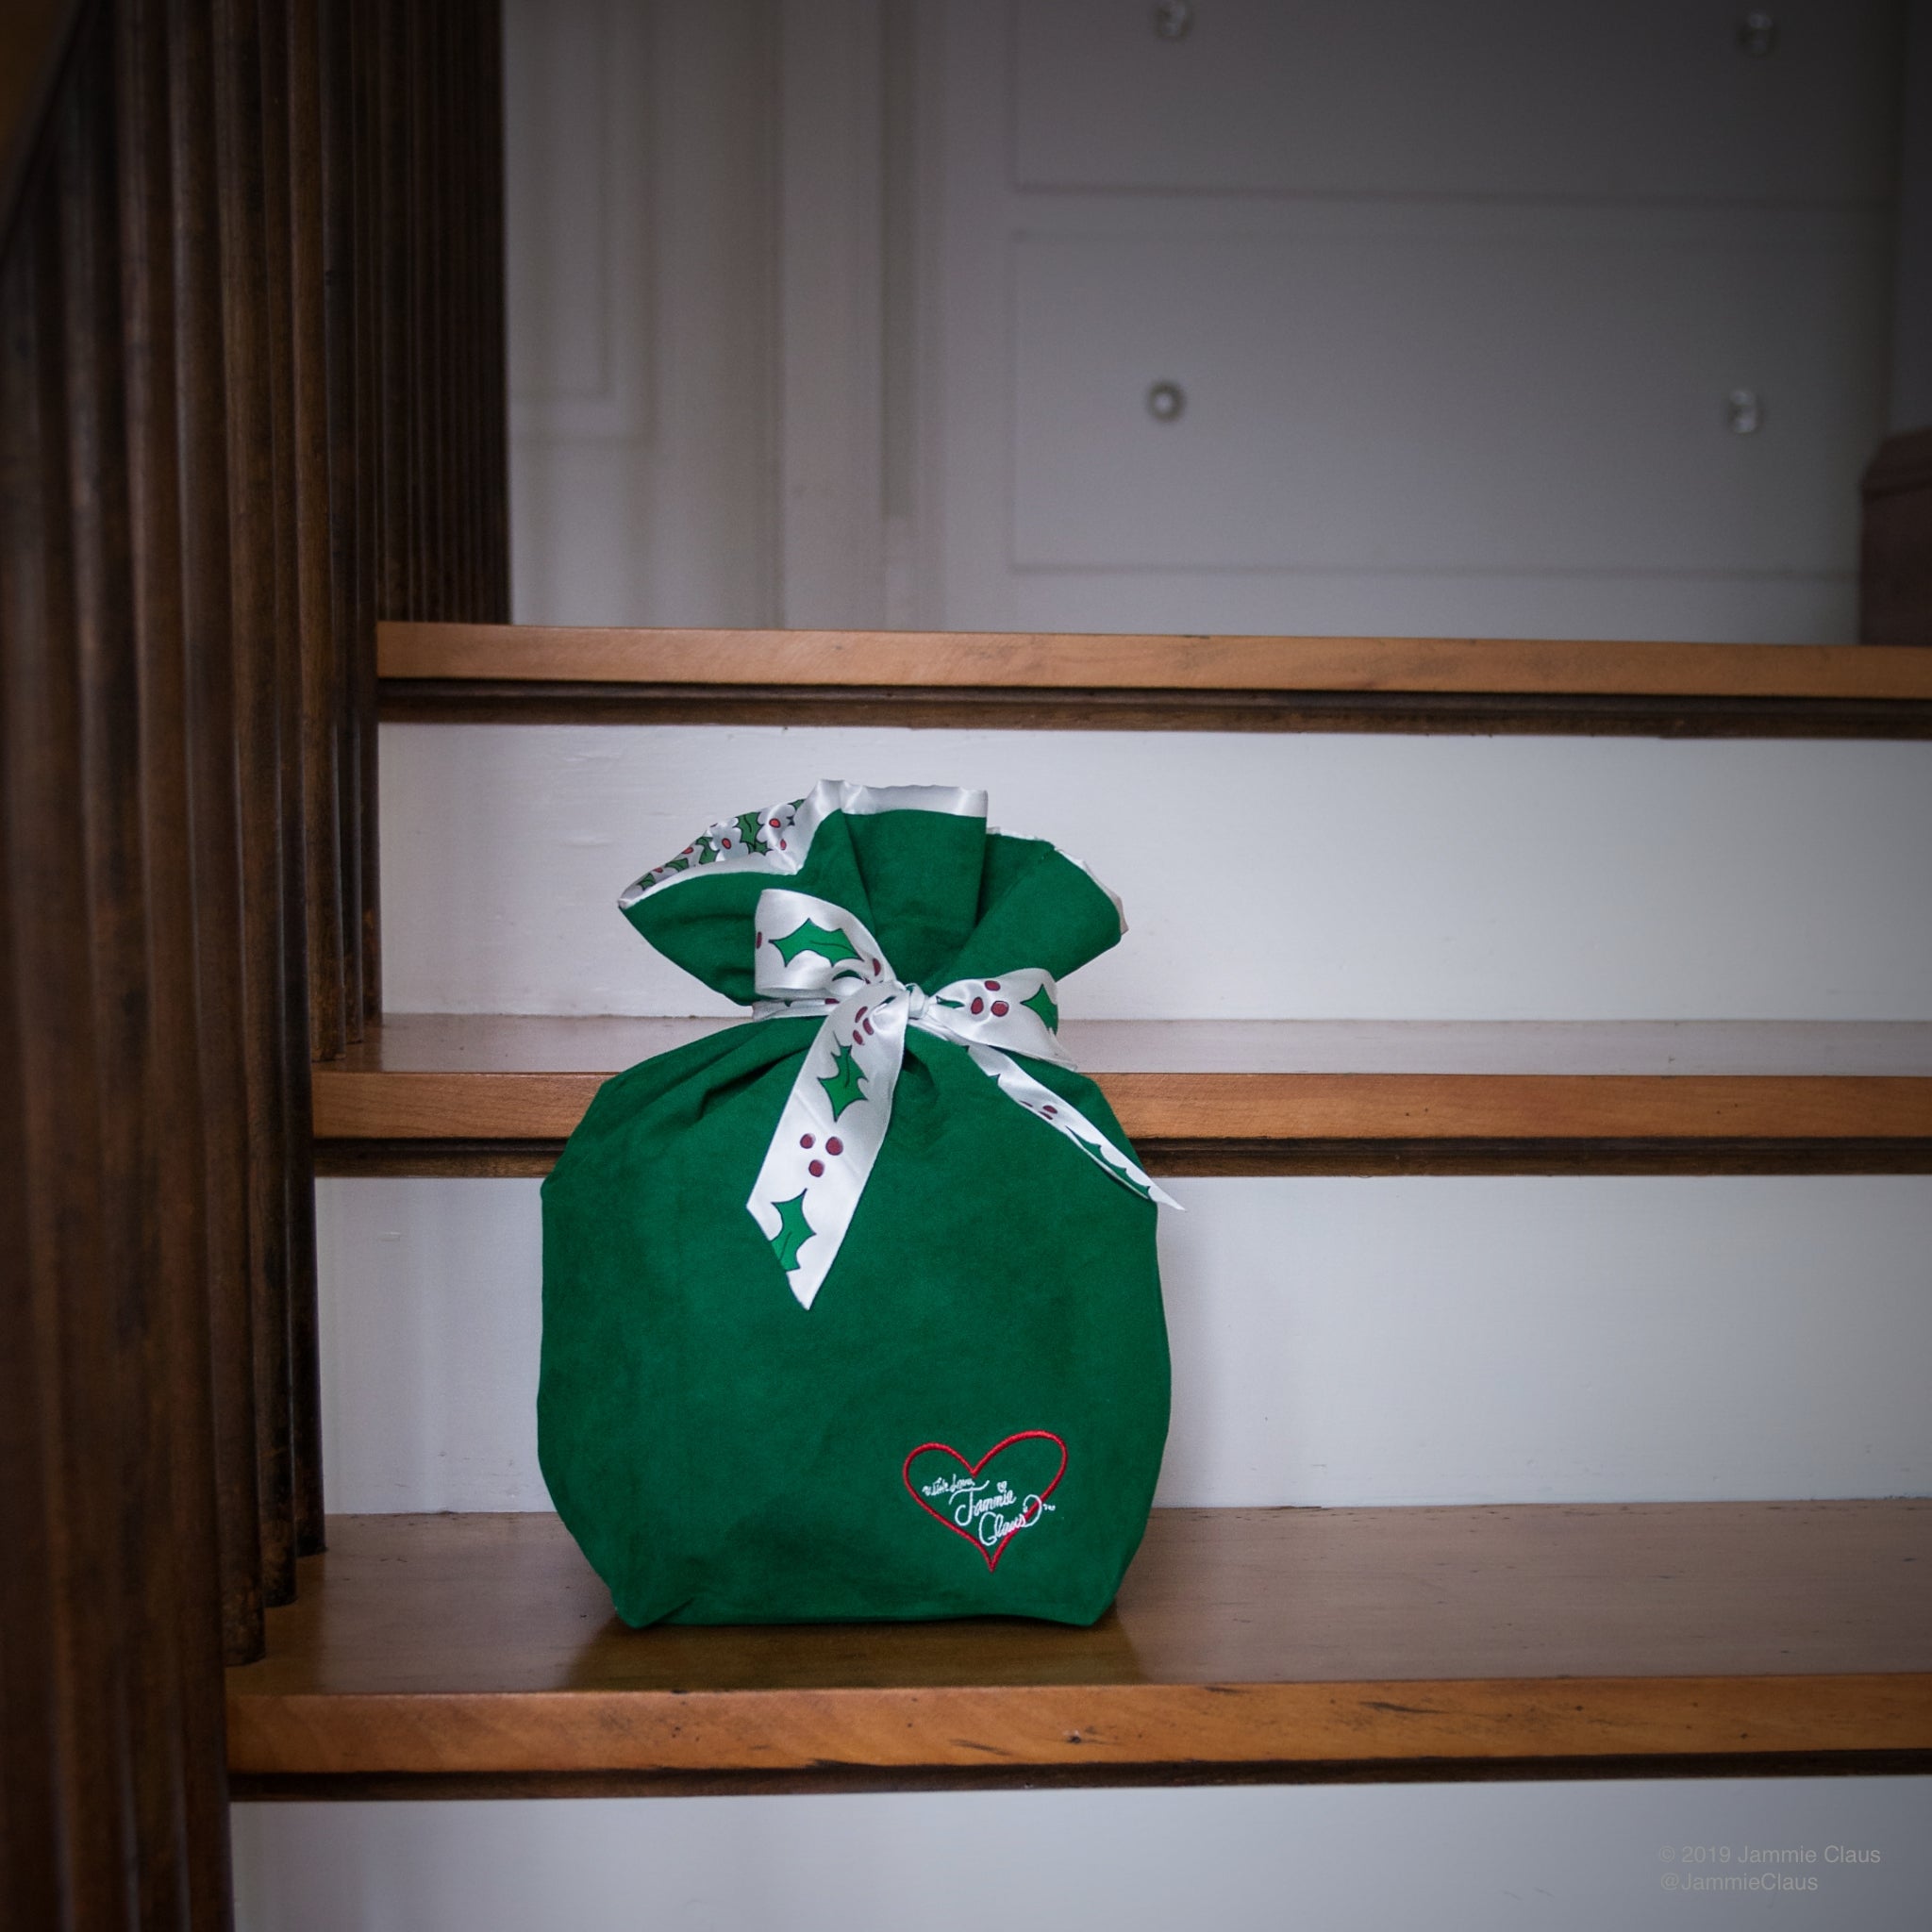 Jammie Claus Bag found on the steps